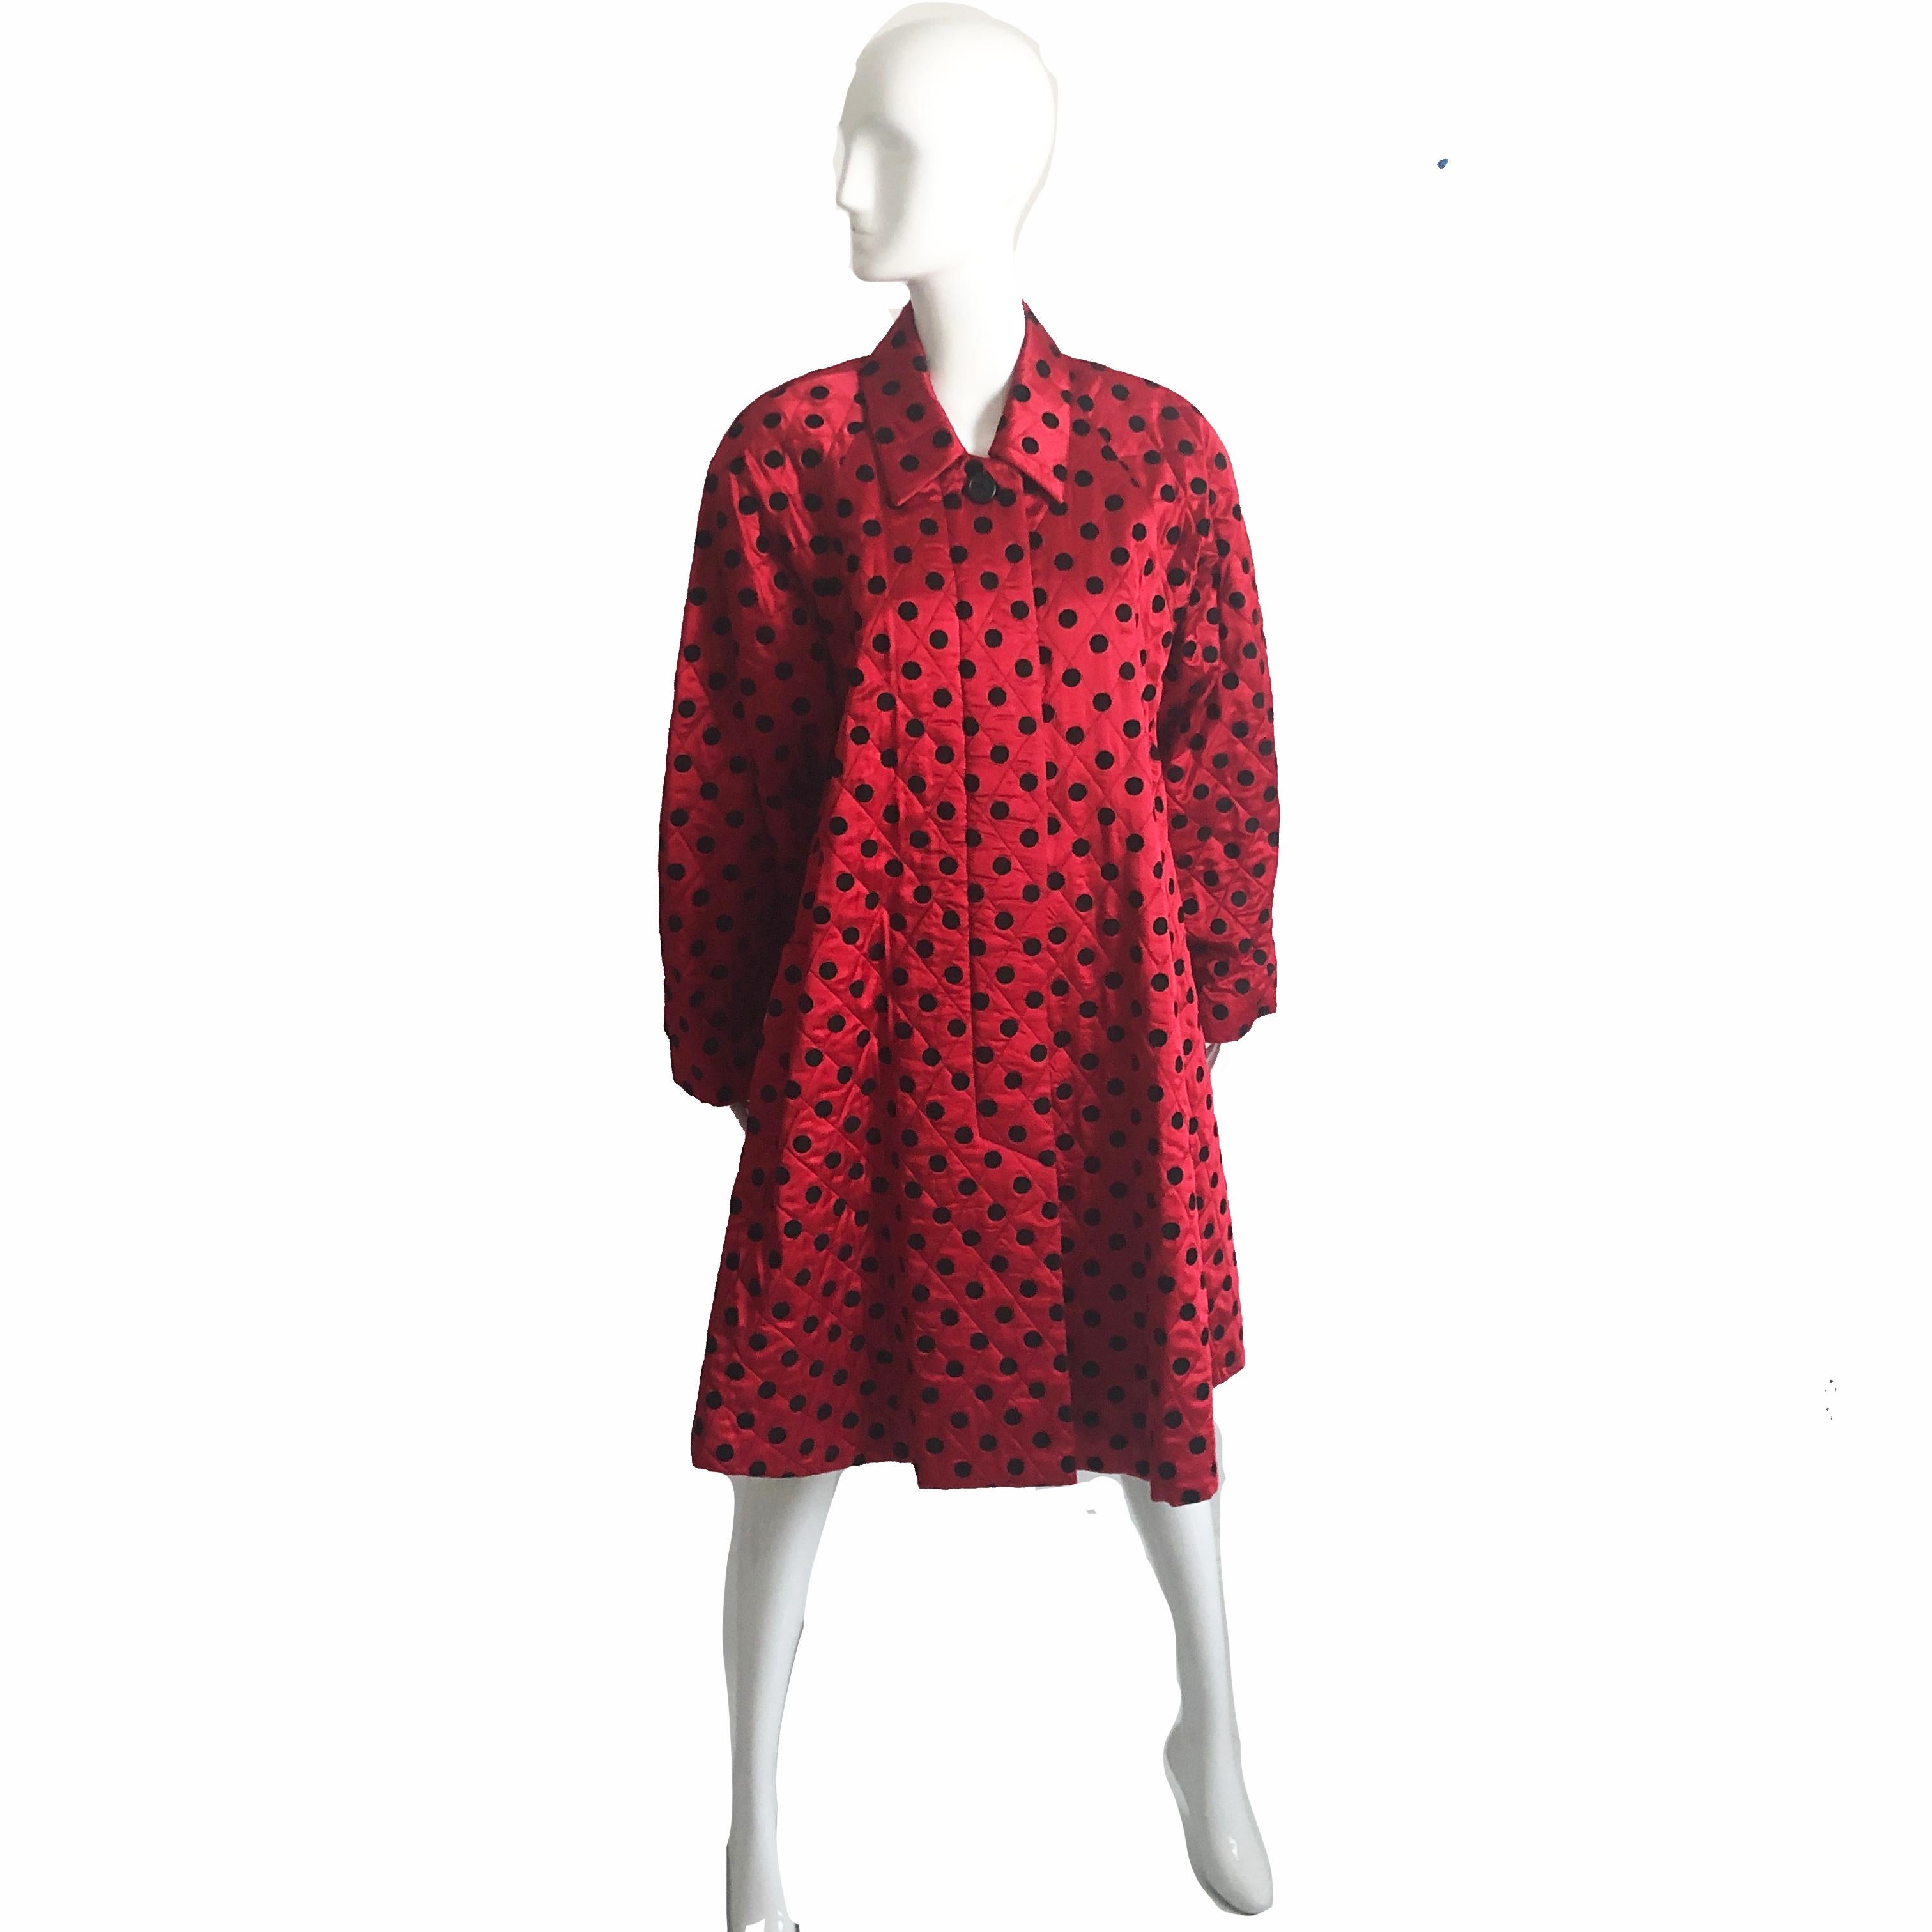 This fabulous evening coat was made by Christian Dior, most likely in the early 80s.  Made from silk satin, it features a black polka dot motif, dolman sleeves and a wide swing hem.  Fully lined with shoulder pads and fastens with one button at the